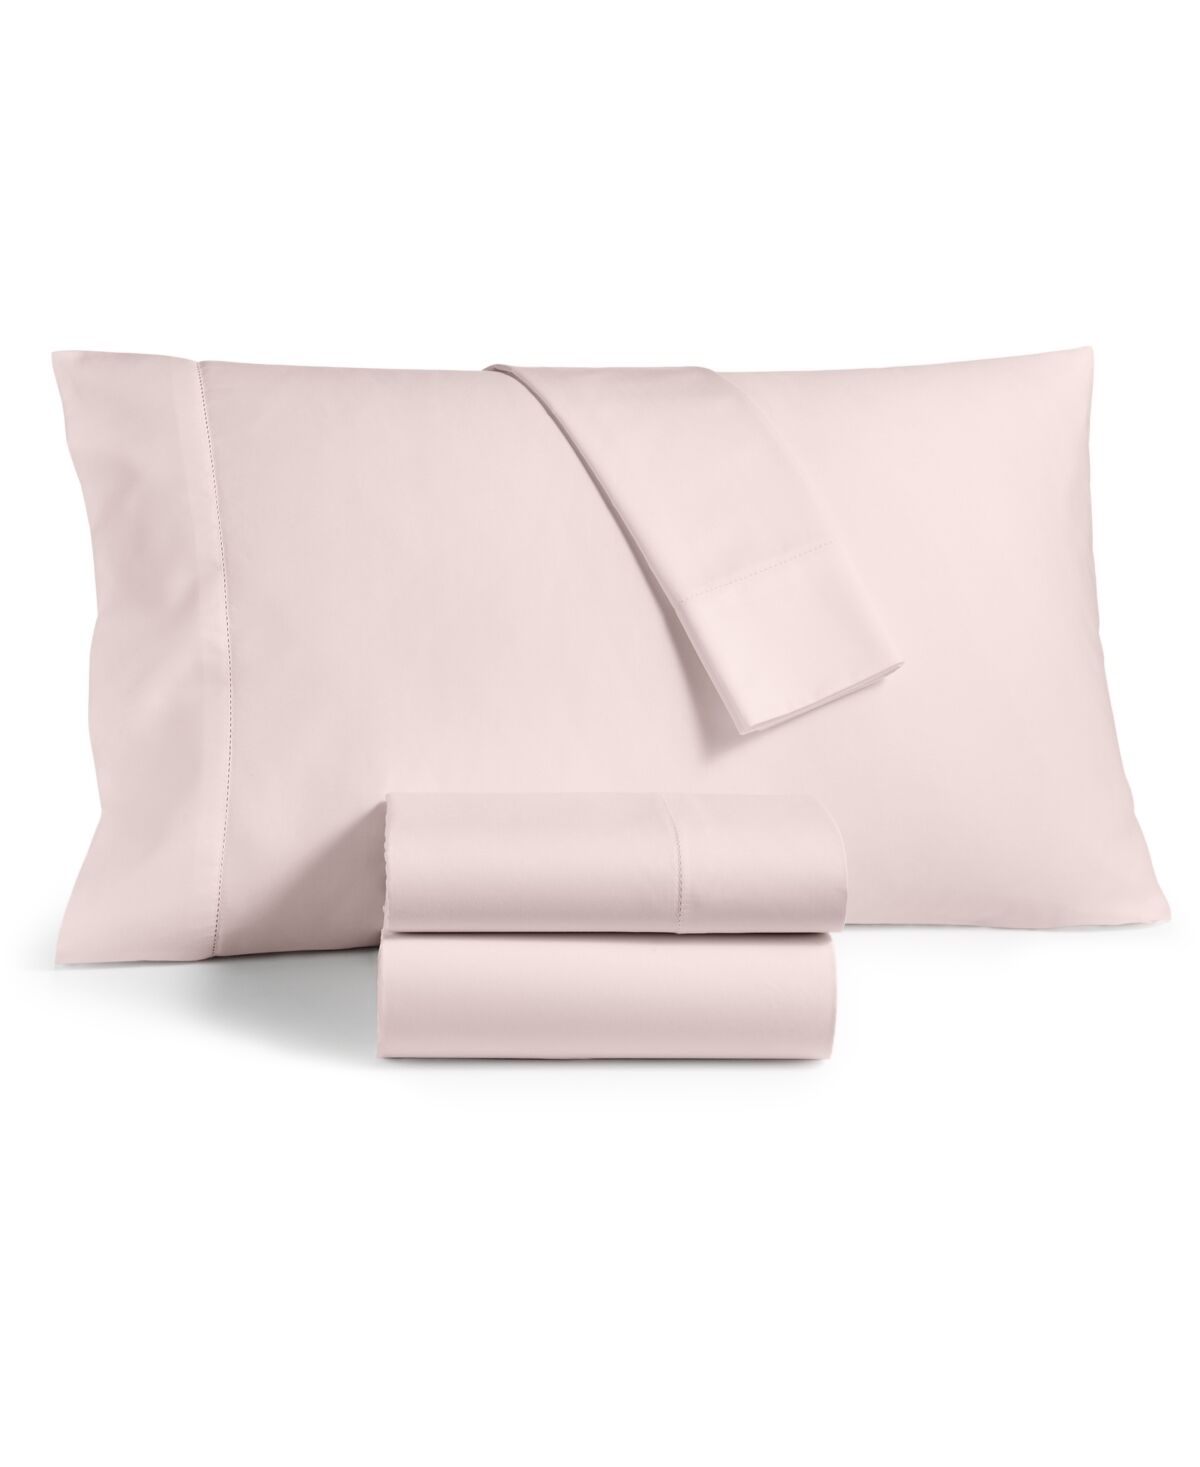 Hotel Collection 680 Thread Count 100% Supima Cotton Sheet Set, Queen, Created for Macy's - Rosebud